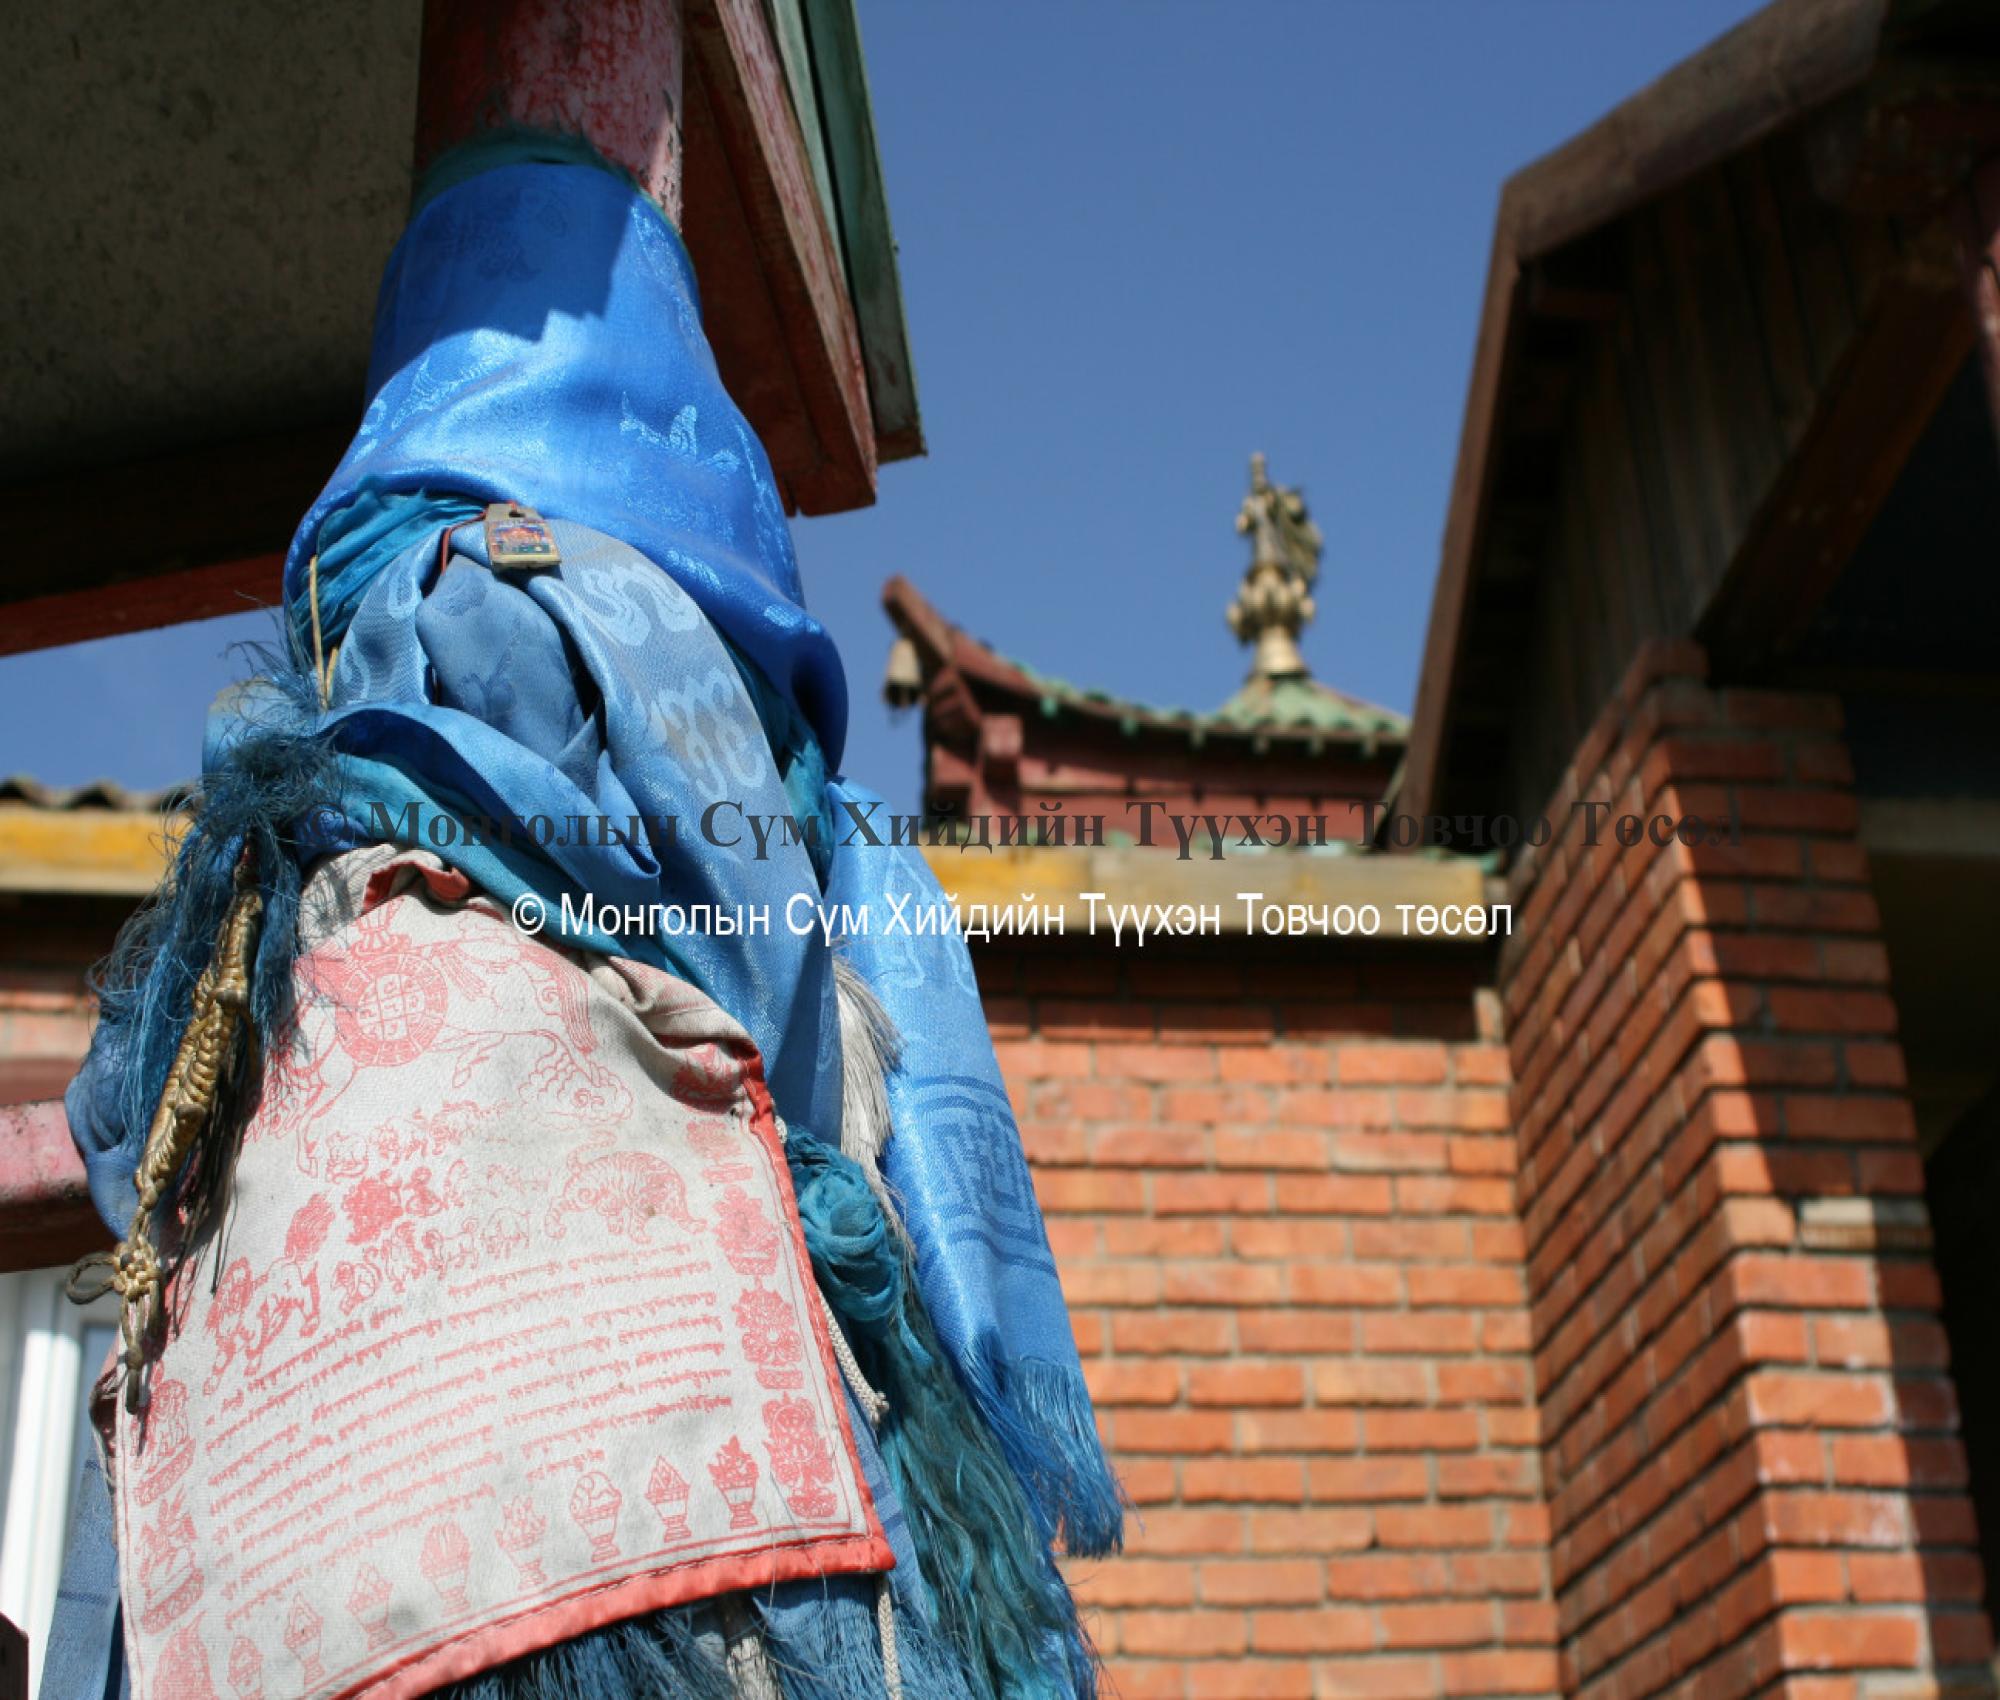 Silken scarves and prayer flags